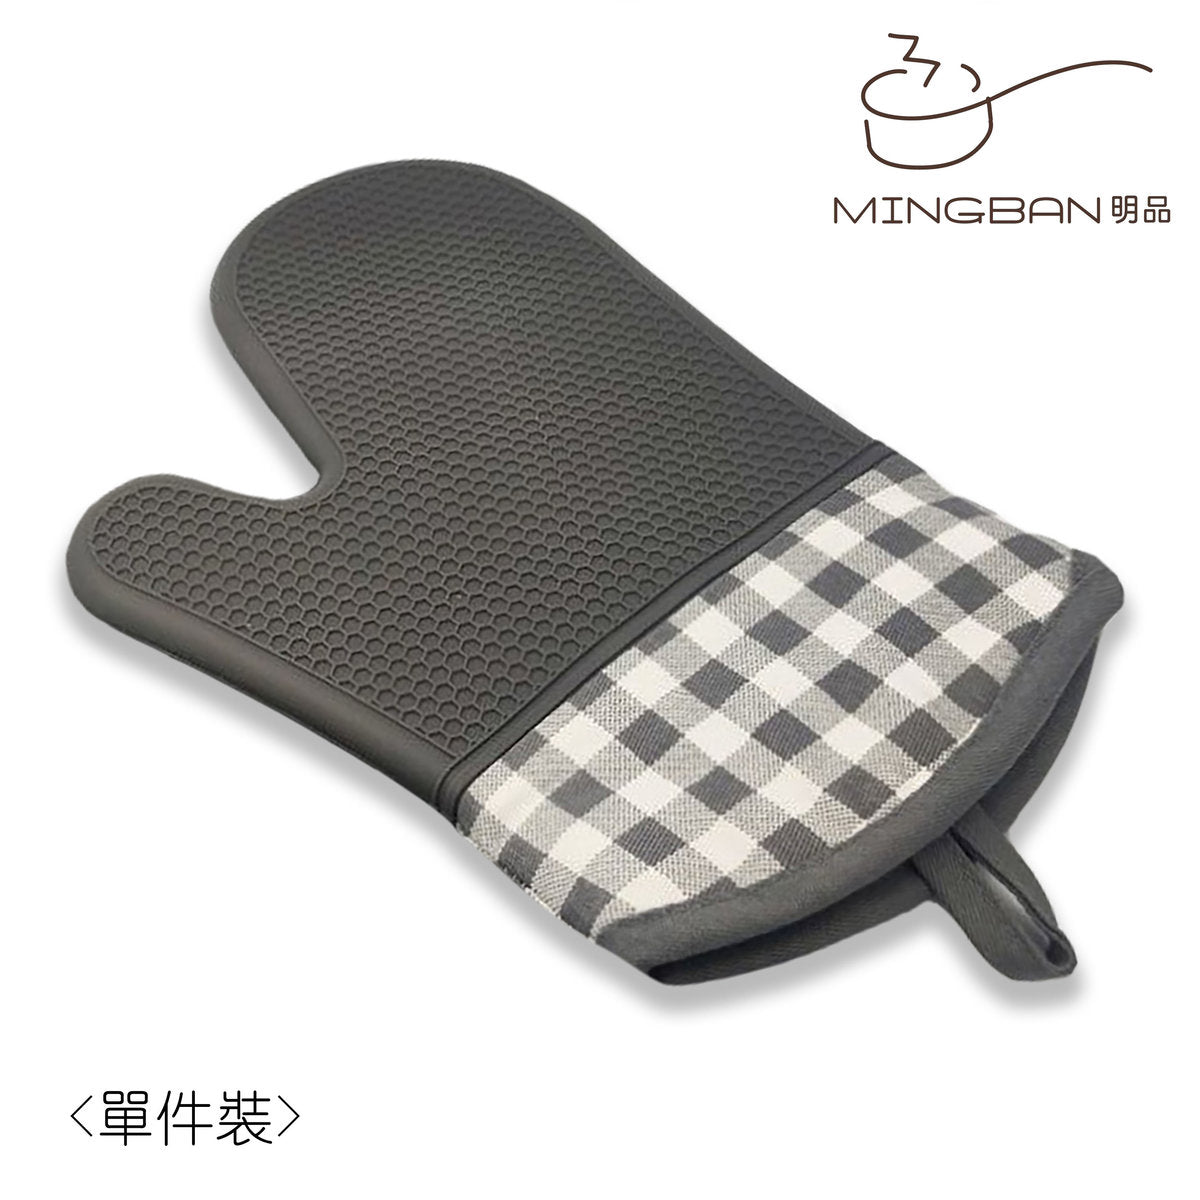 Heat Resistant Short  Silicone Oven Mitt - Gray